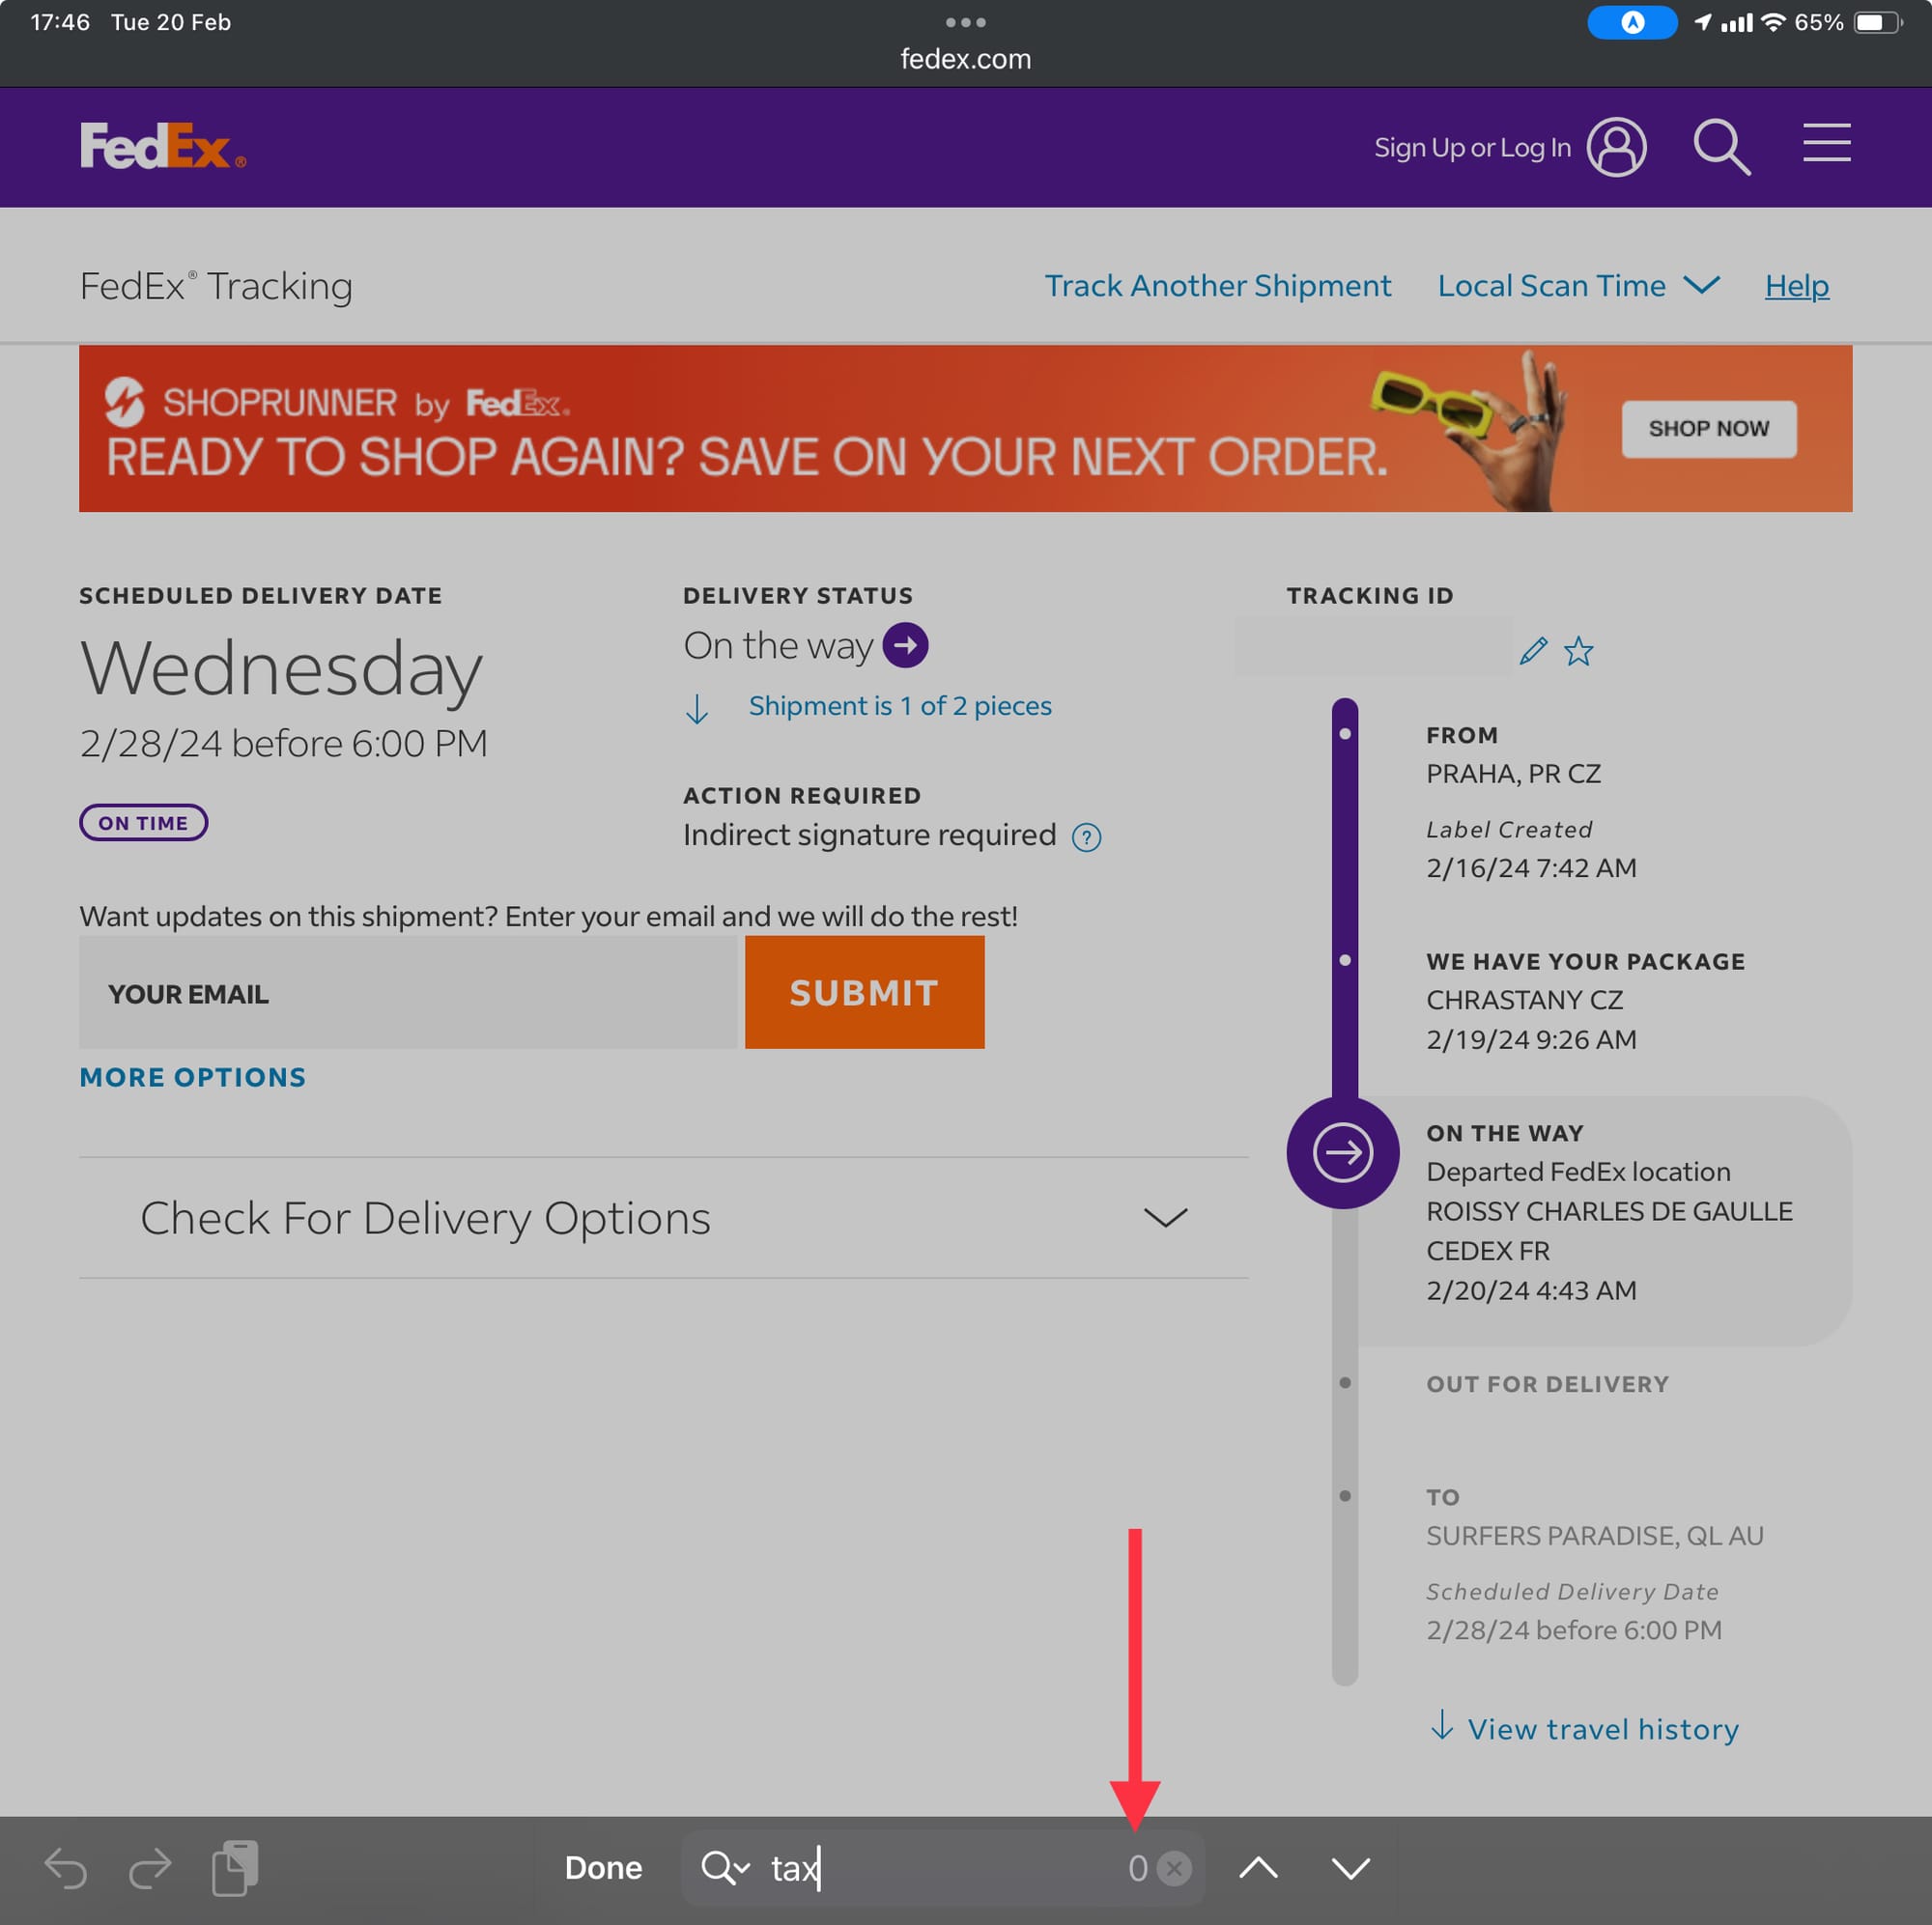 Thanks FedEx, This is Why we Keep Getting Phished